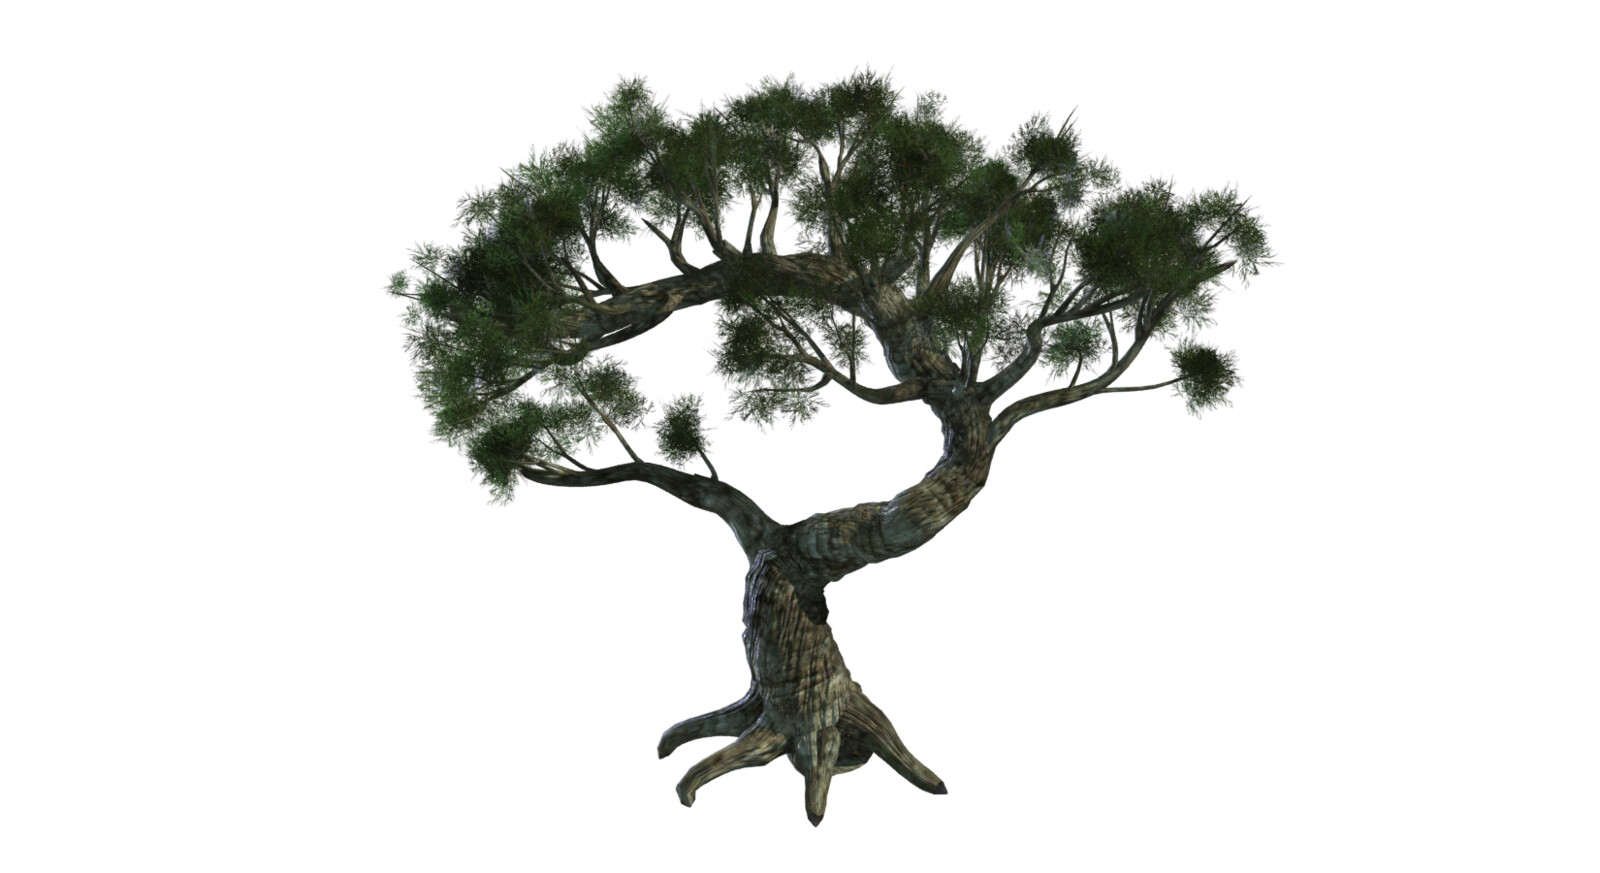 This is the SpeedTree base mesh I started with. I modified it pretty extensively.